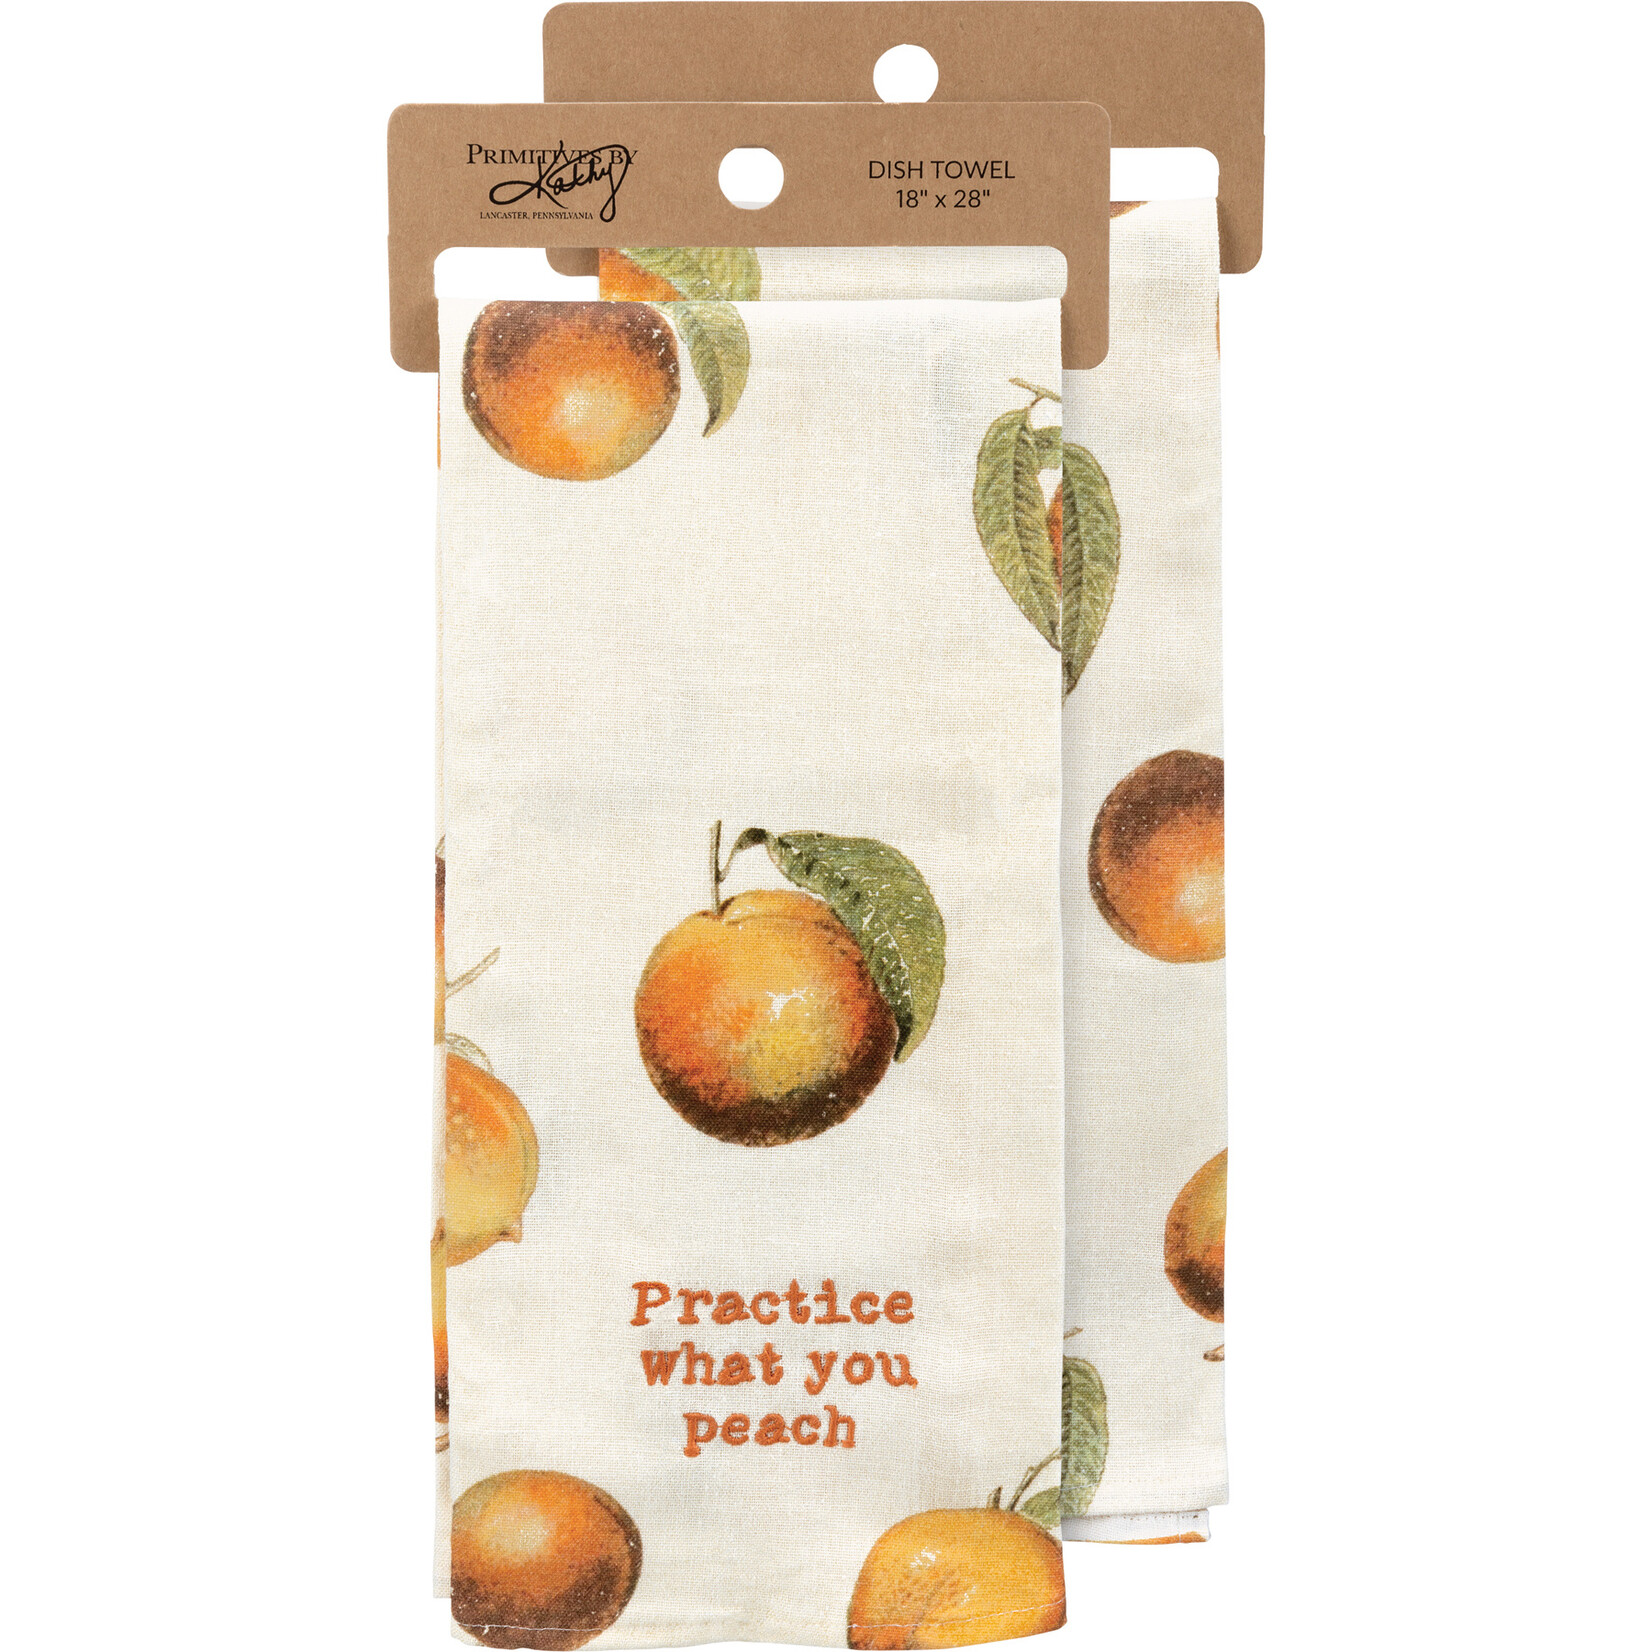 Primitives by Kathy Primitives by Kathy Practice What You Peach Kitchen Towel